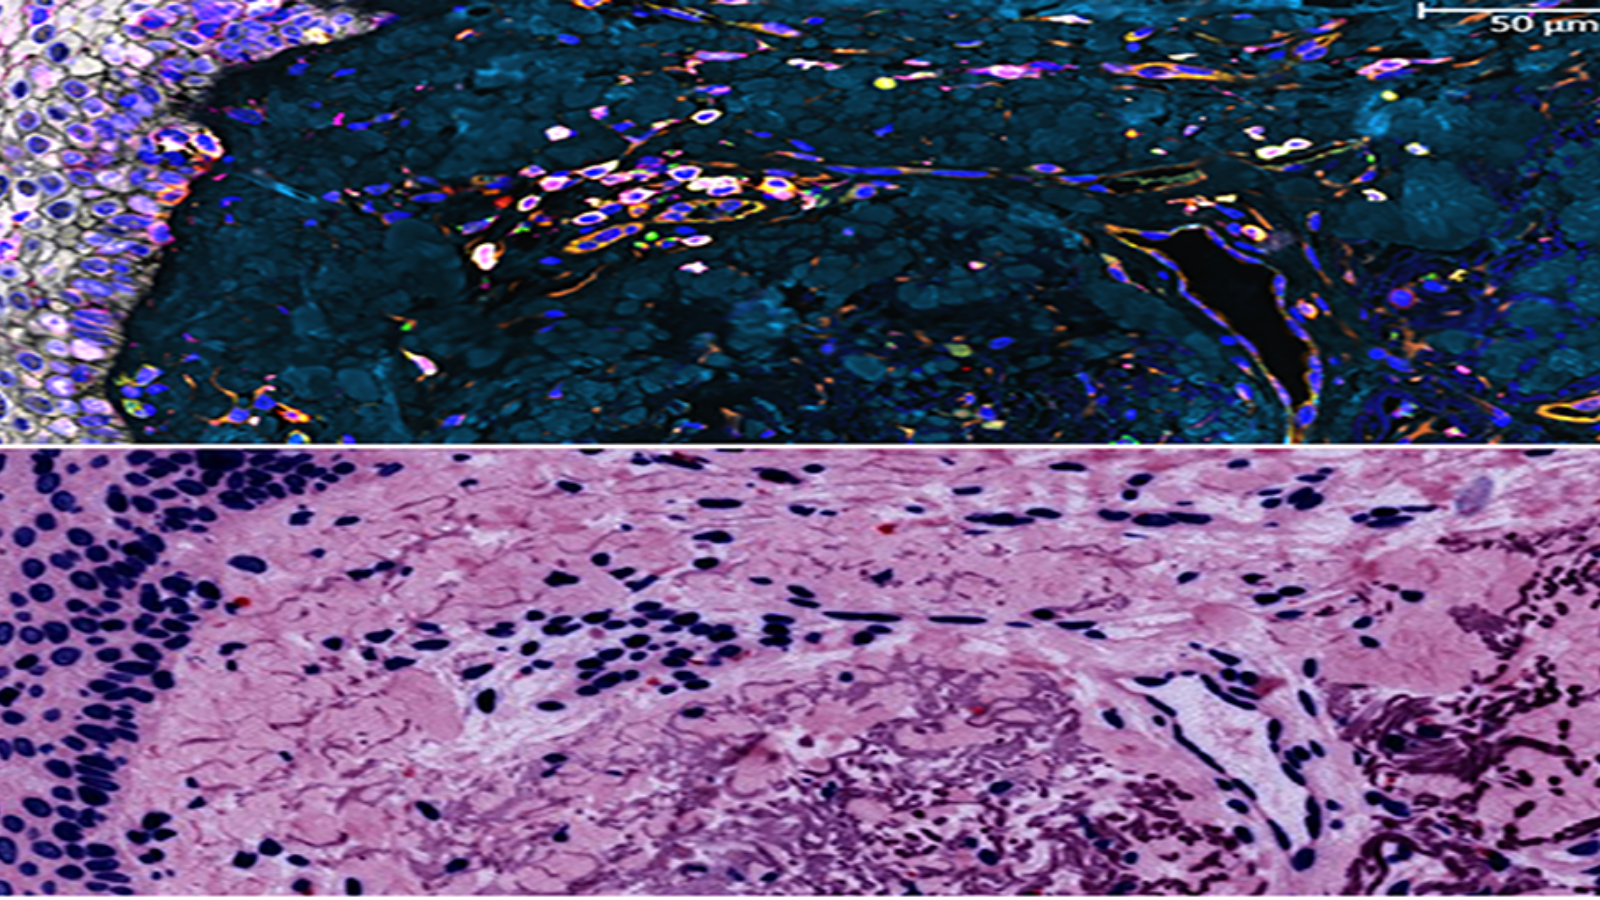 Proteins in the epidermis, the outermost skin layer, courtesy of Dr. Fiona Ginty at GE Research